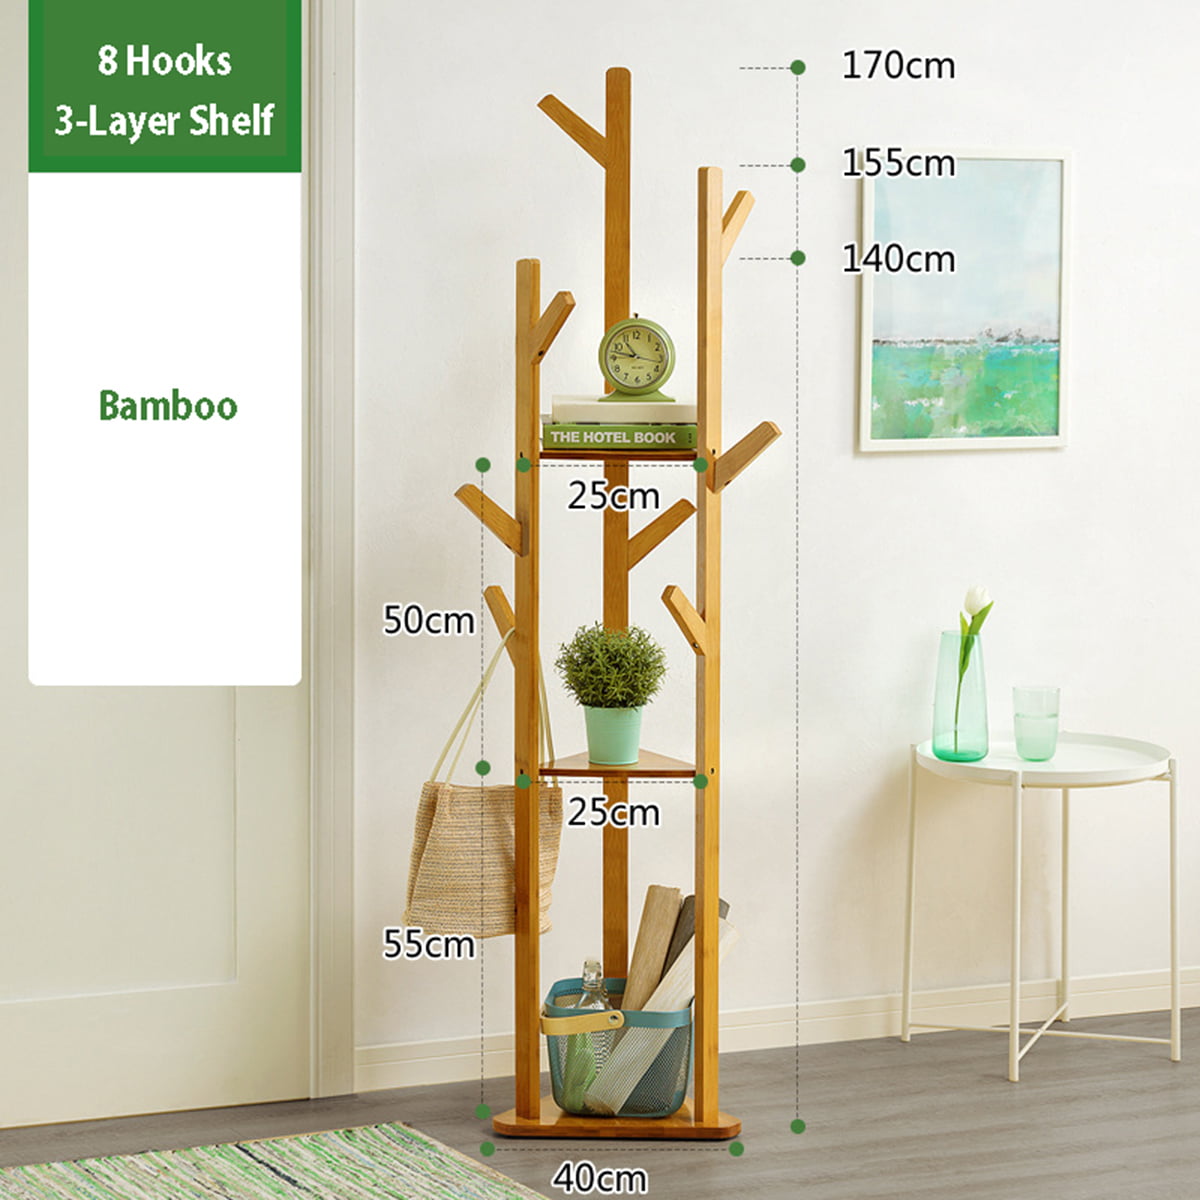 Details about   3 Layer 8 Hooks Shelf Clothes Coat Hat Rack Tree Stand Bamboo Hanger Organizer